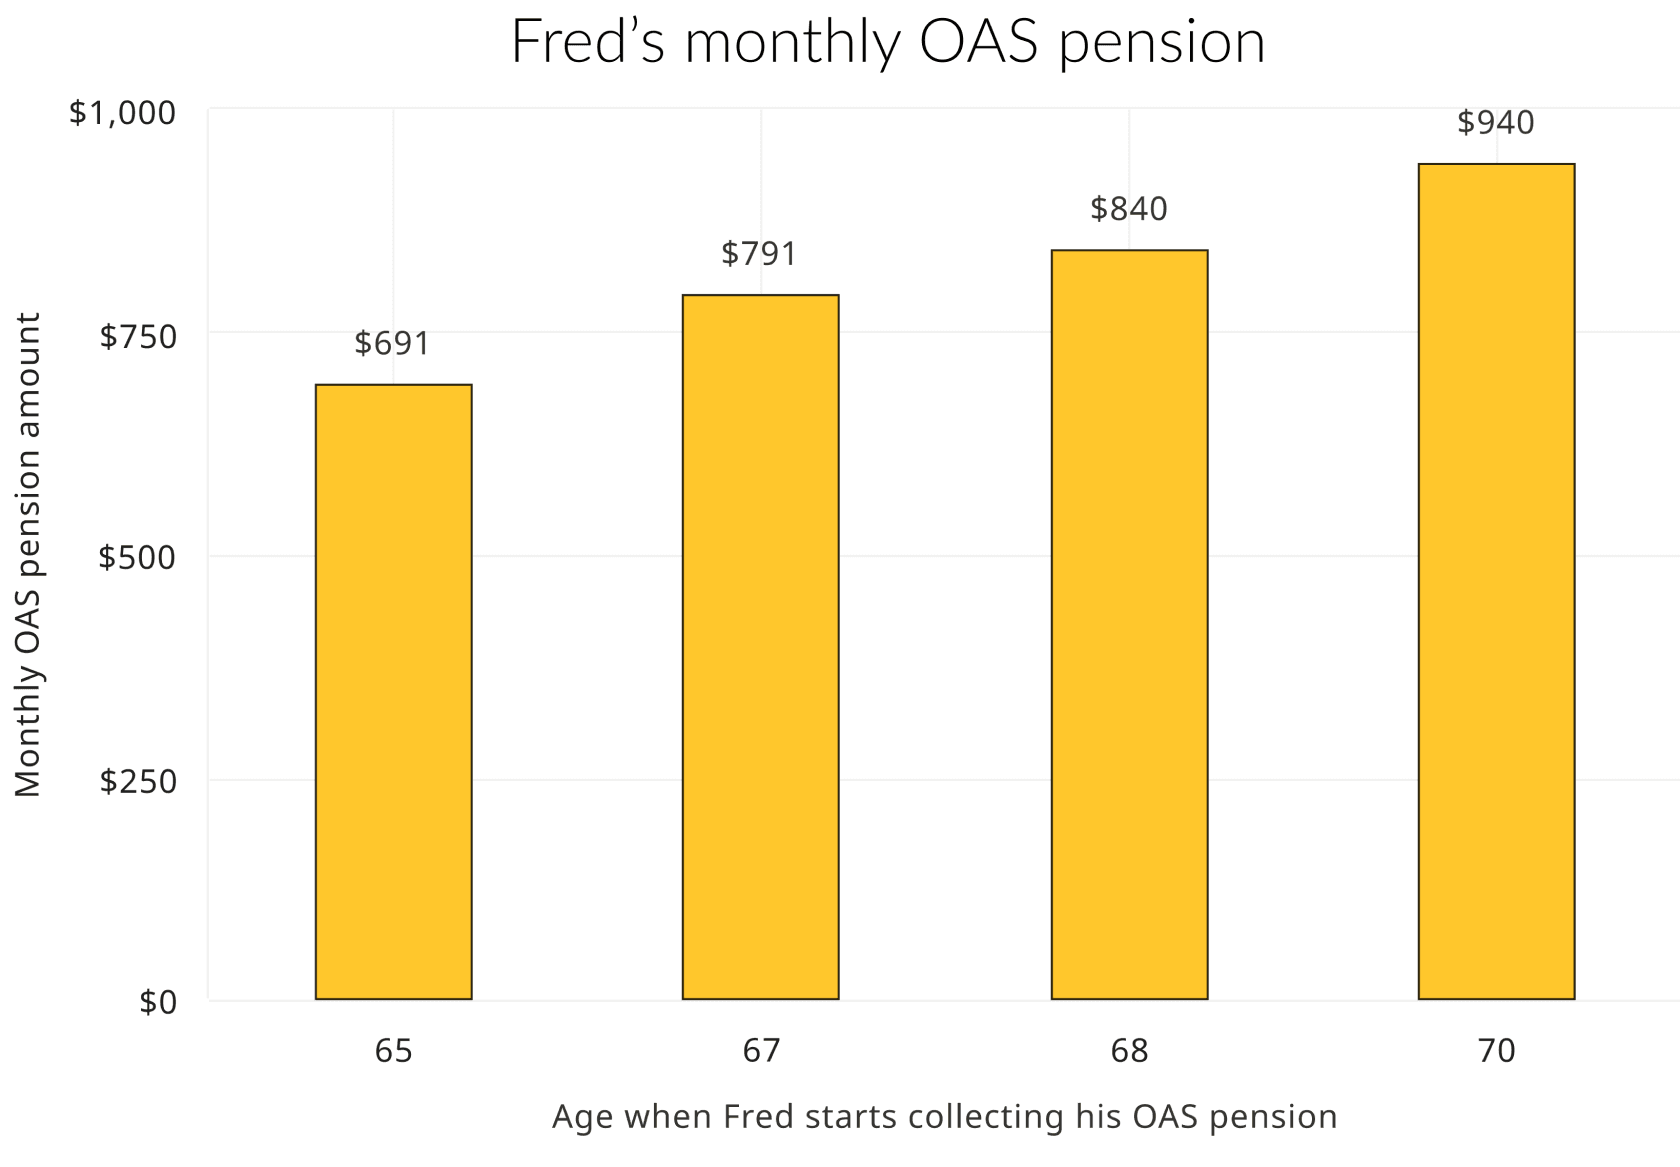 The chart shows changes in Fred's monthly OAS pension payments depending on what age he starts. It shows that the longer he waits to start his pension, the more money he'll collect every month. He could start his OAS pension at age 65 for the smallest amount, or at age 70 for the largest amount. If OAS pension is delayed from age 65 to 68, the difference is around $150 per month.